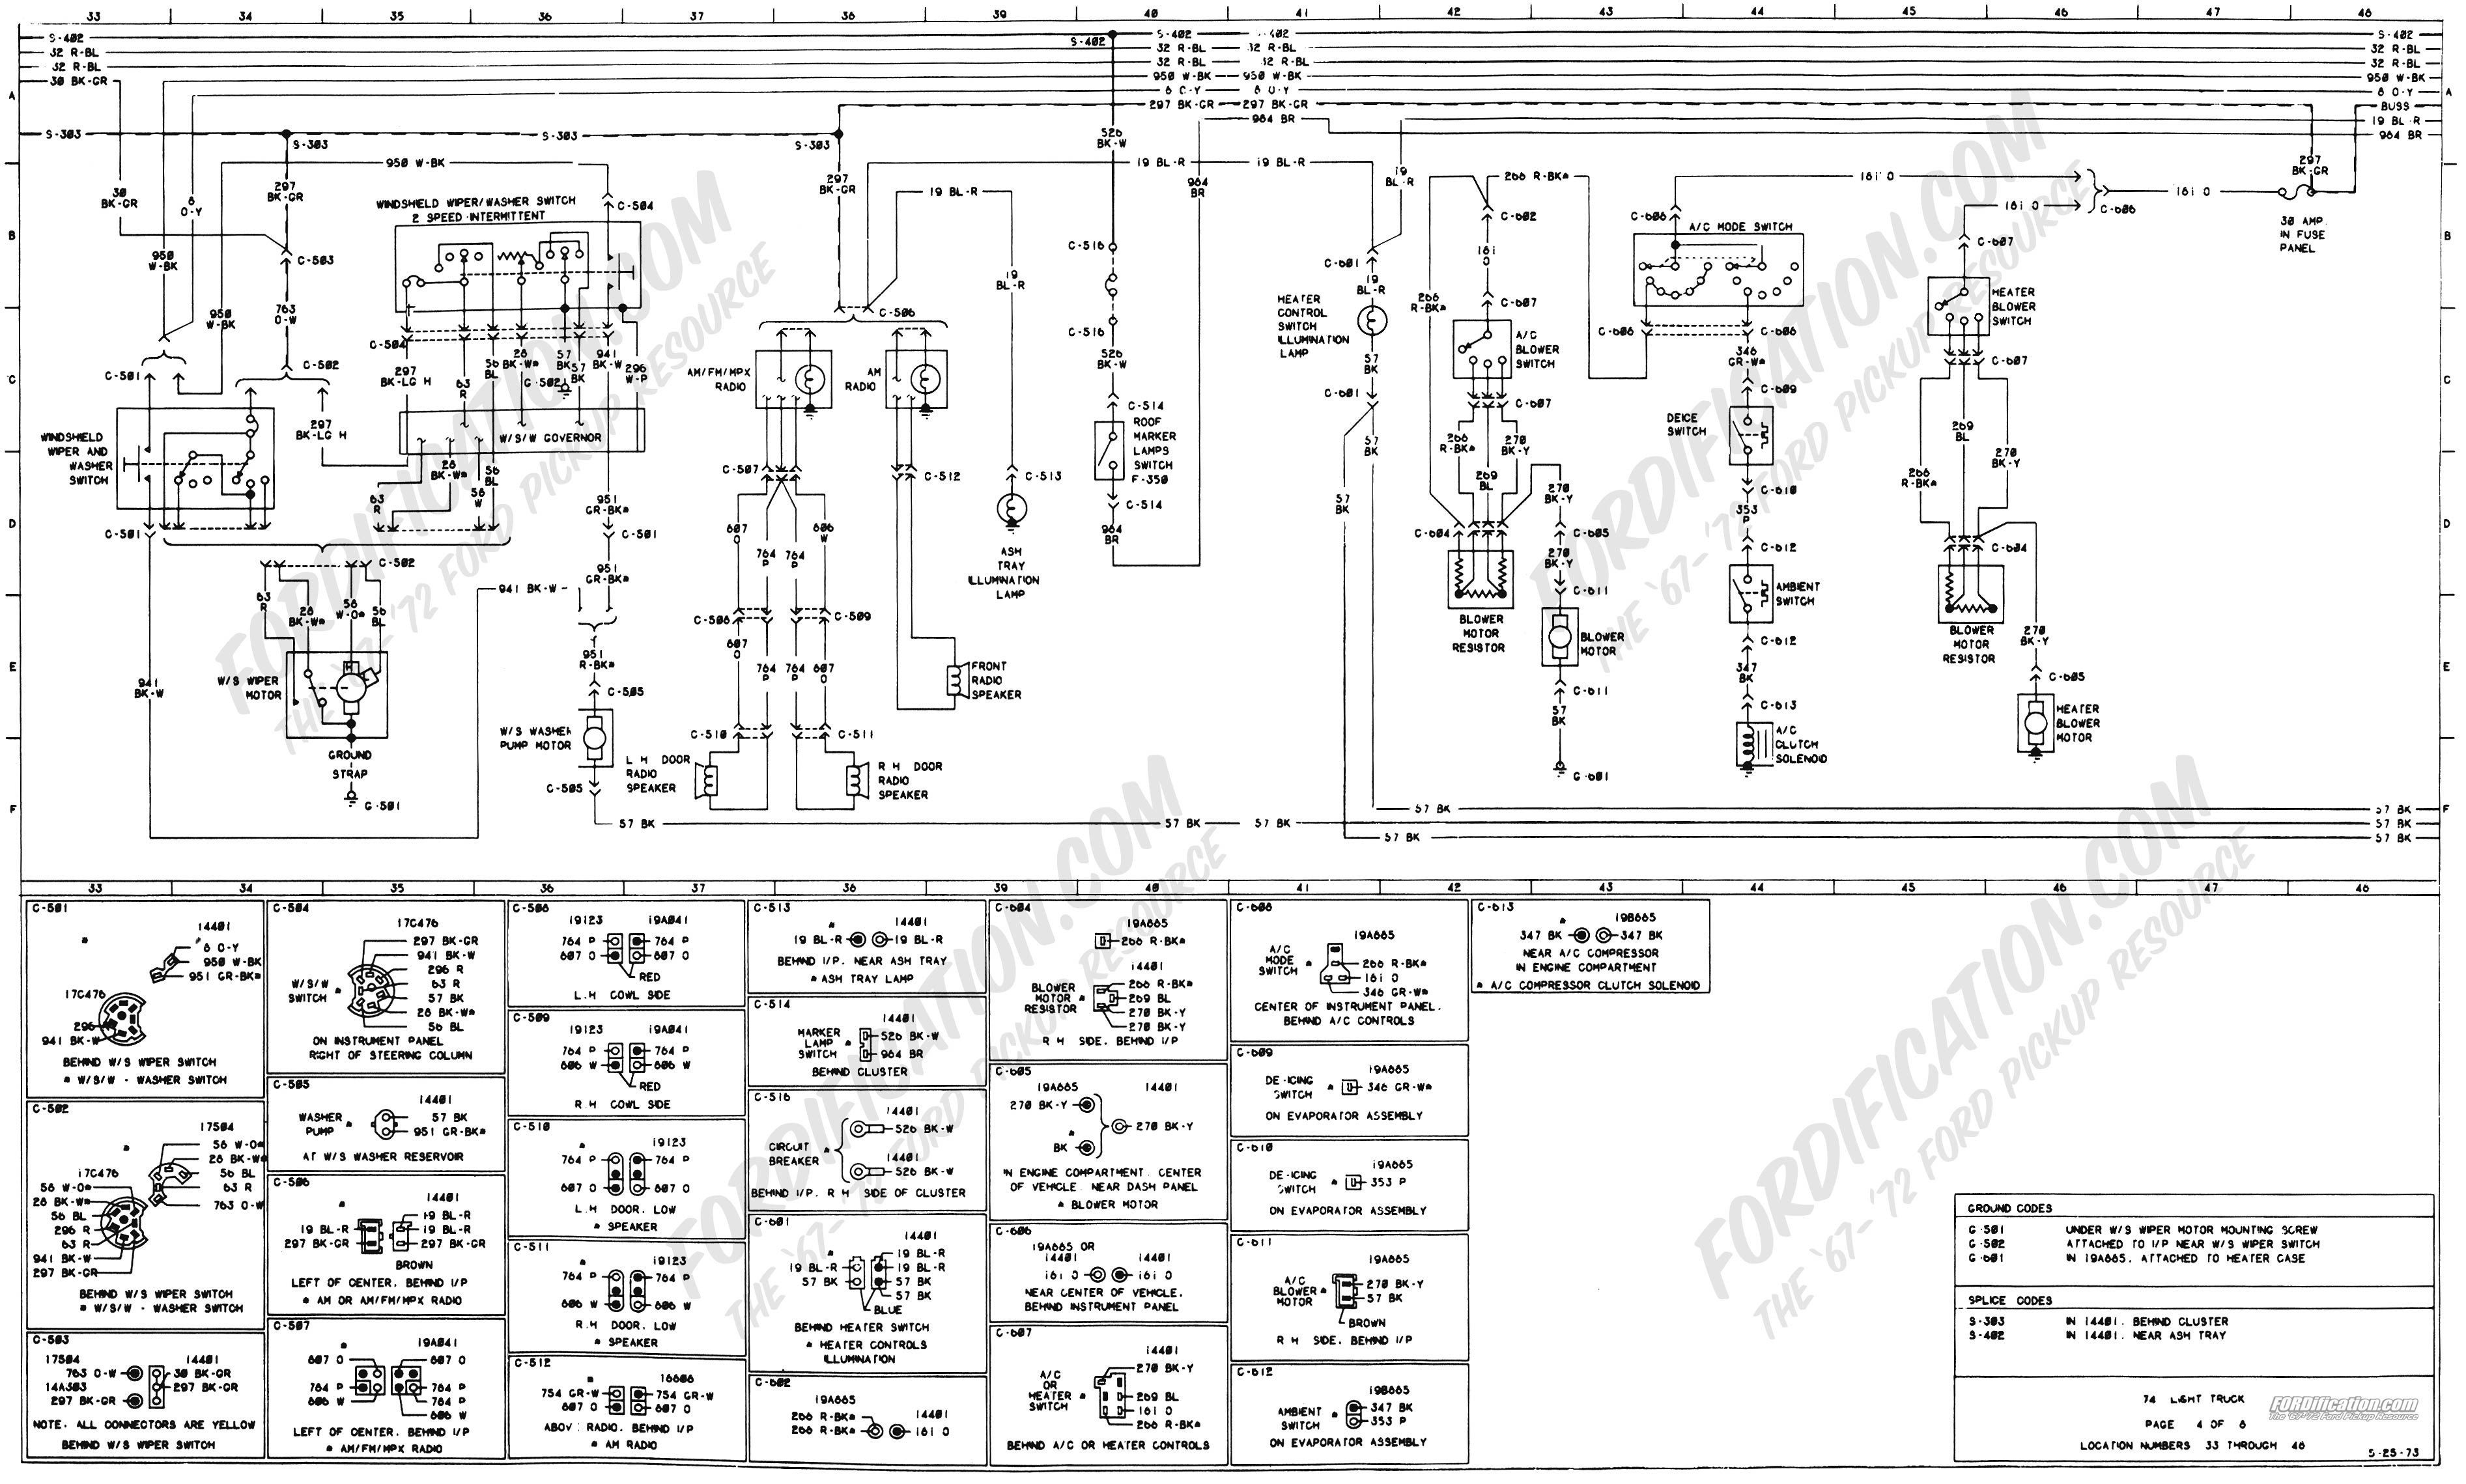 Wiring Diagram On ford 650 1973 1979 ford Truck Wiring Diagrams & Schematics Of Wiring Diagram On ford 650